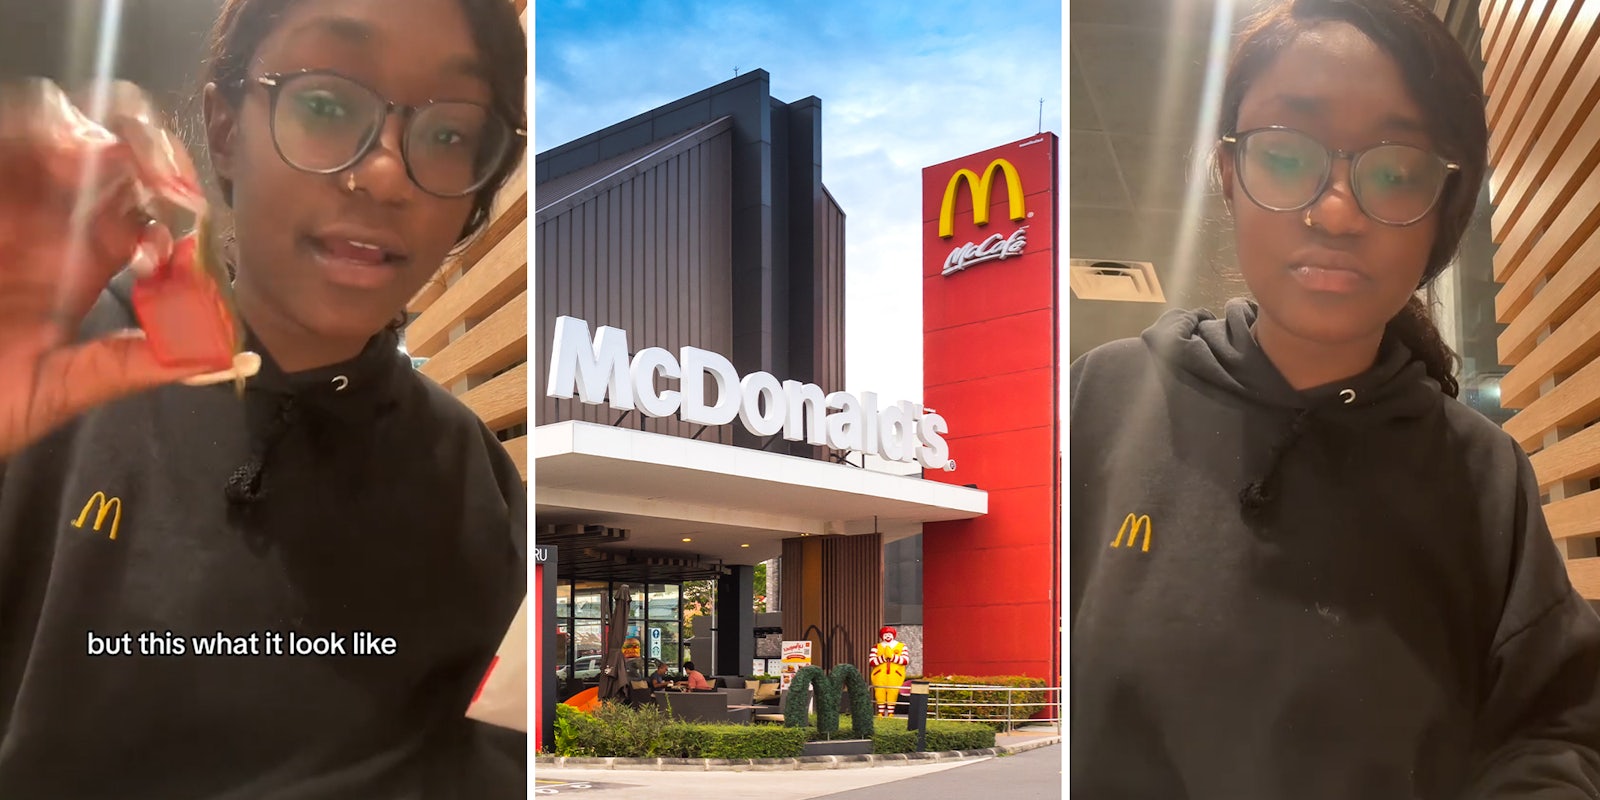 McDonald’s worker tries new WcDonald’s sauce. What is it?